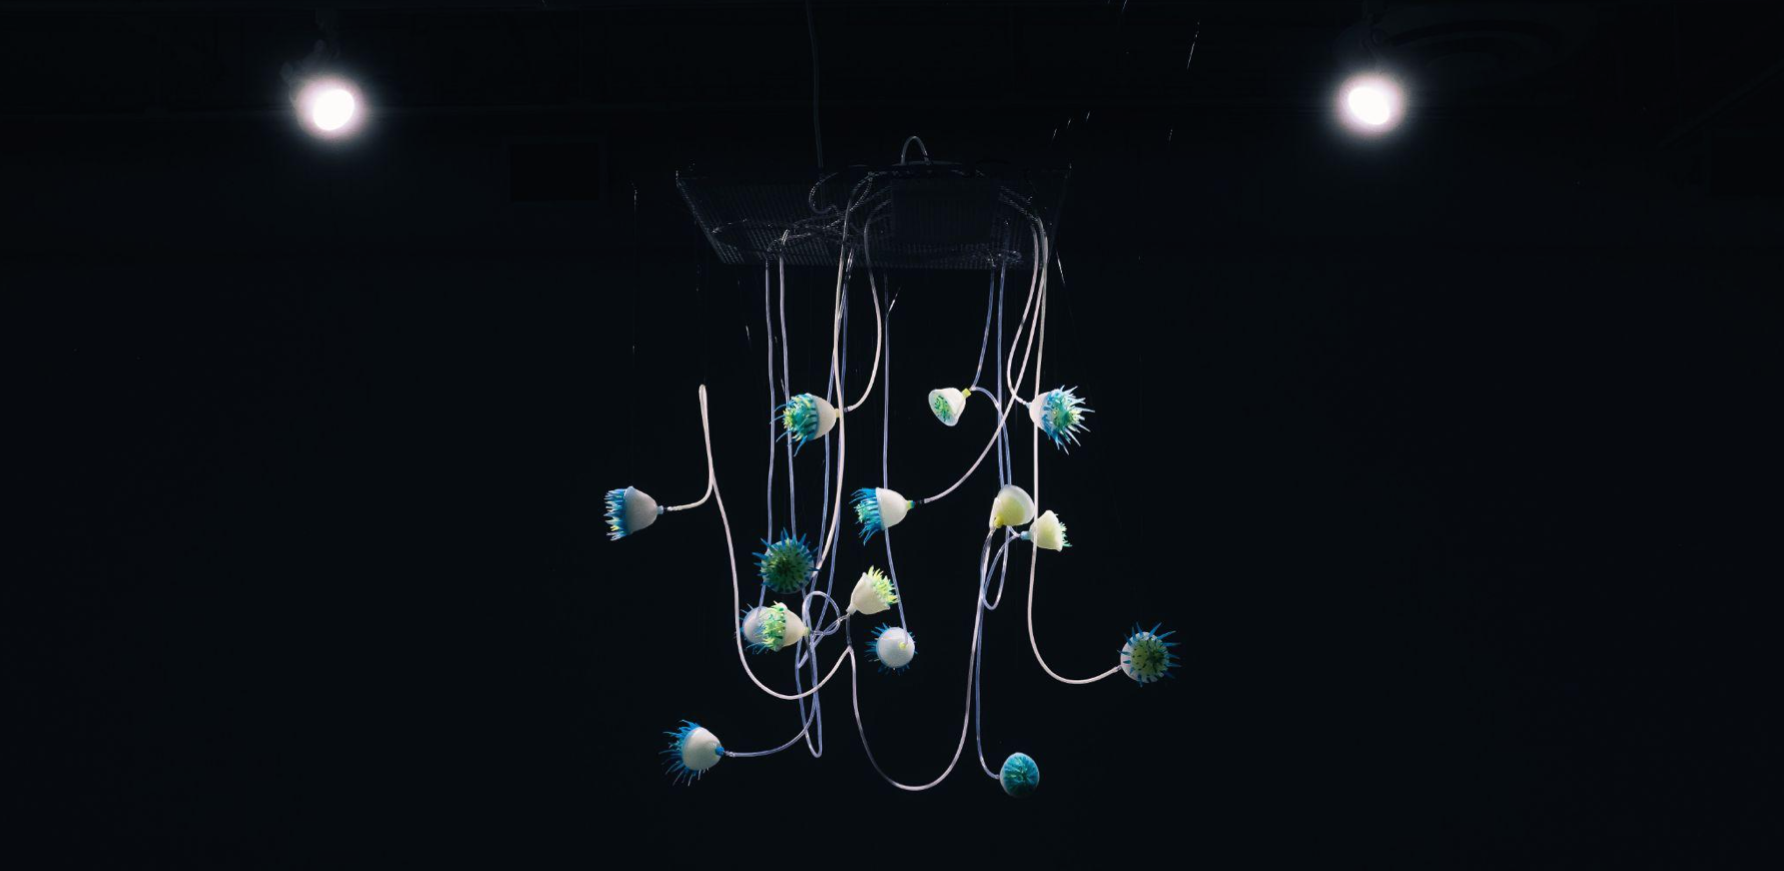 OctoAnemone - Interactive Organisms for Non-human Communications in the Post-Anthropocene Era, Yin Yu